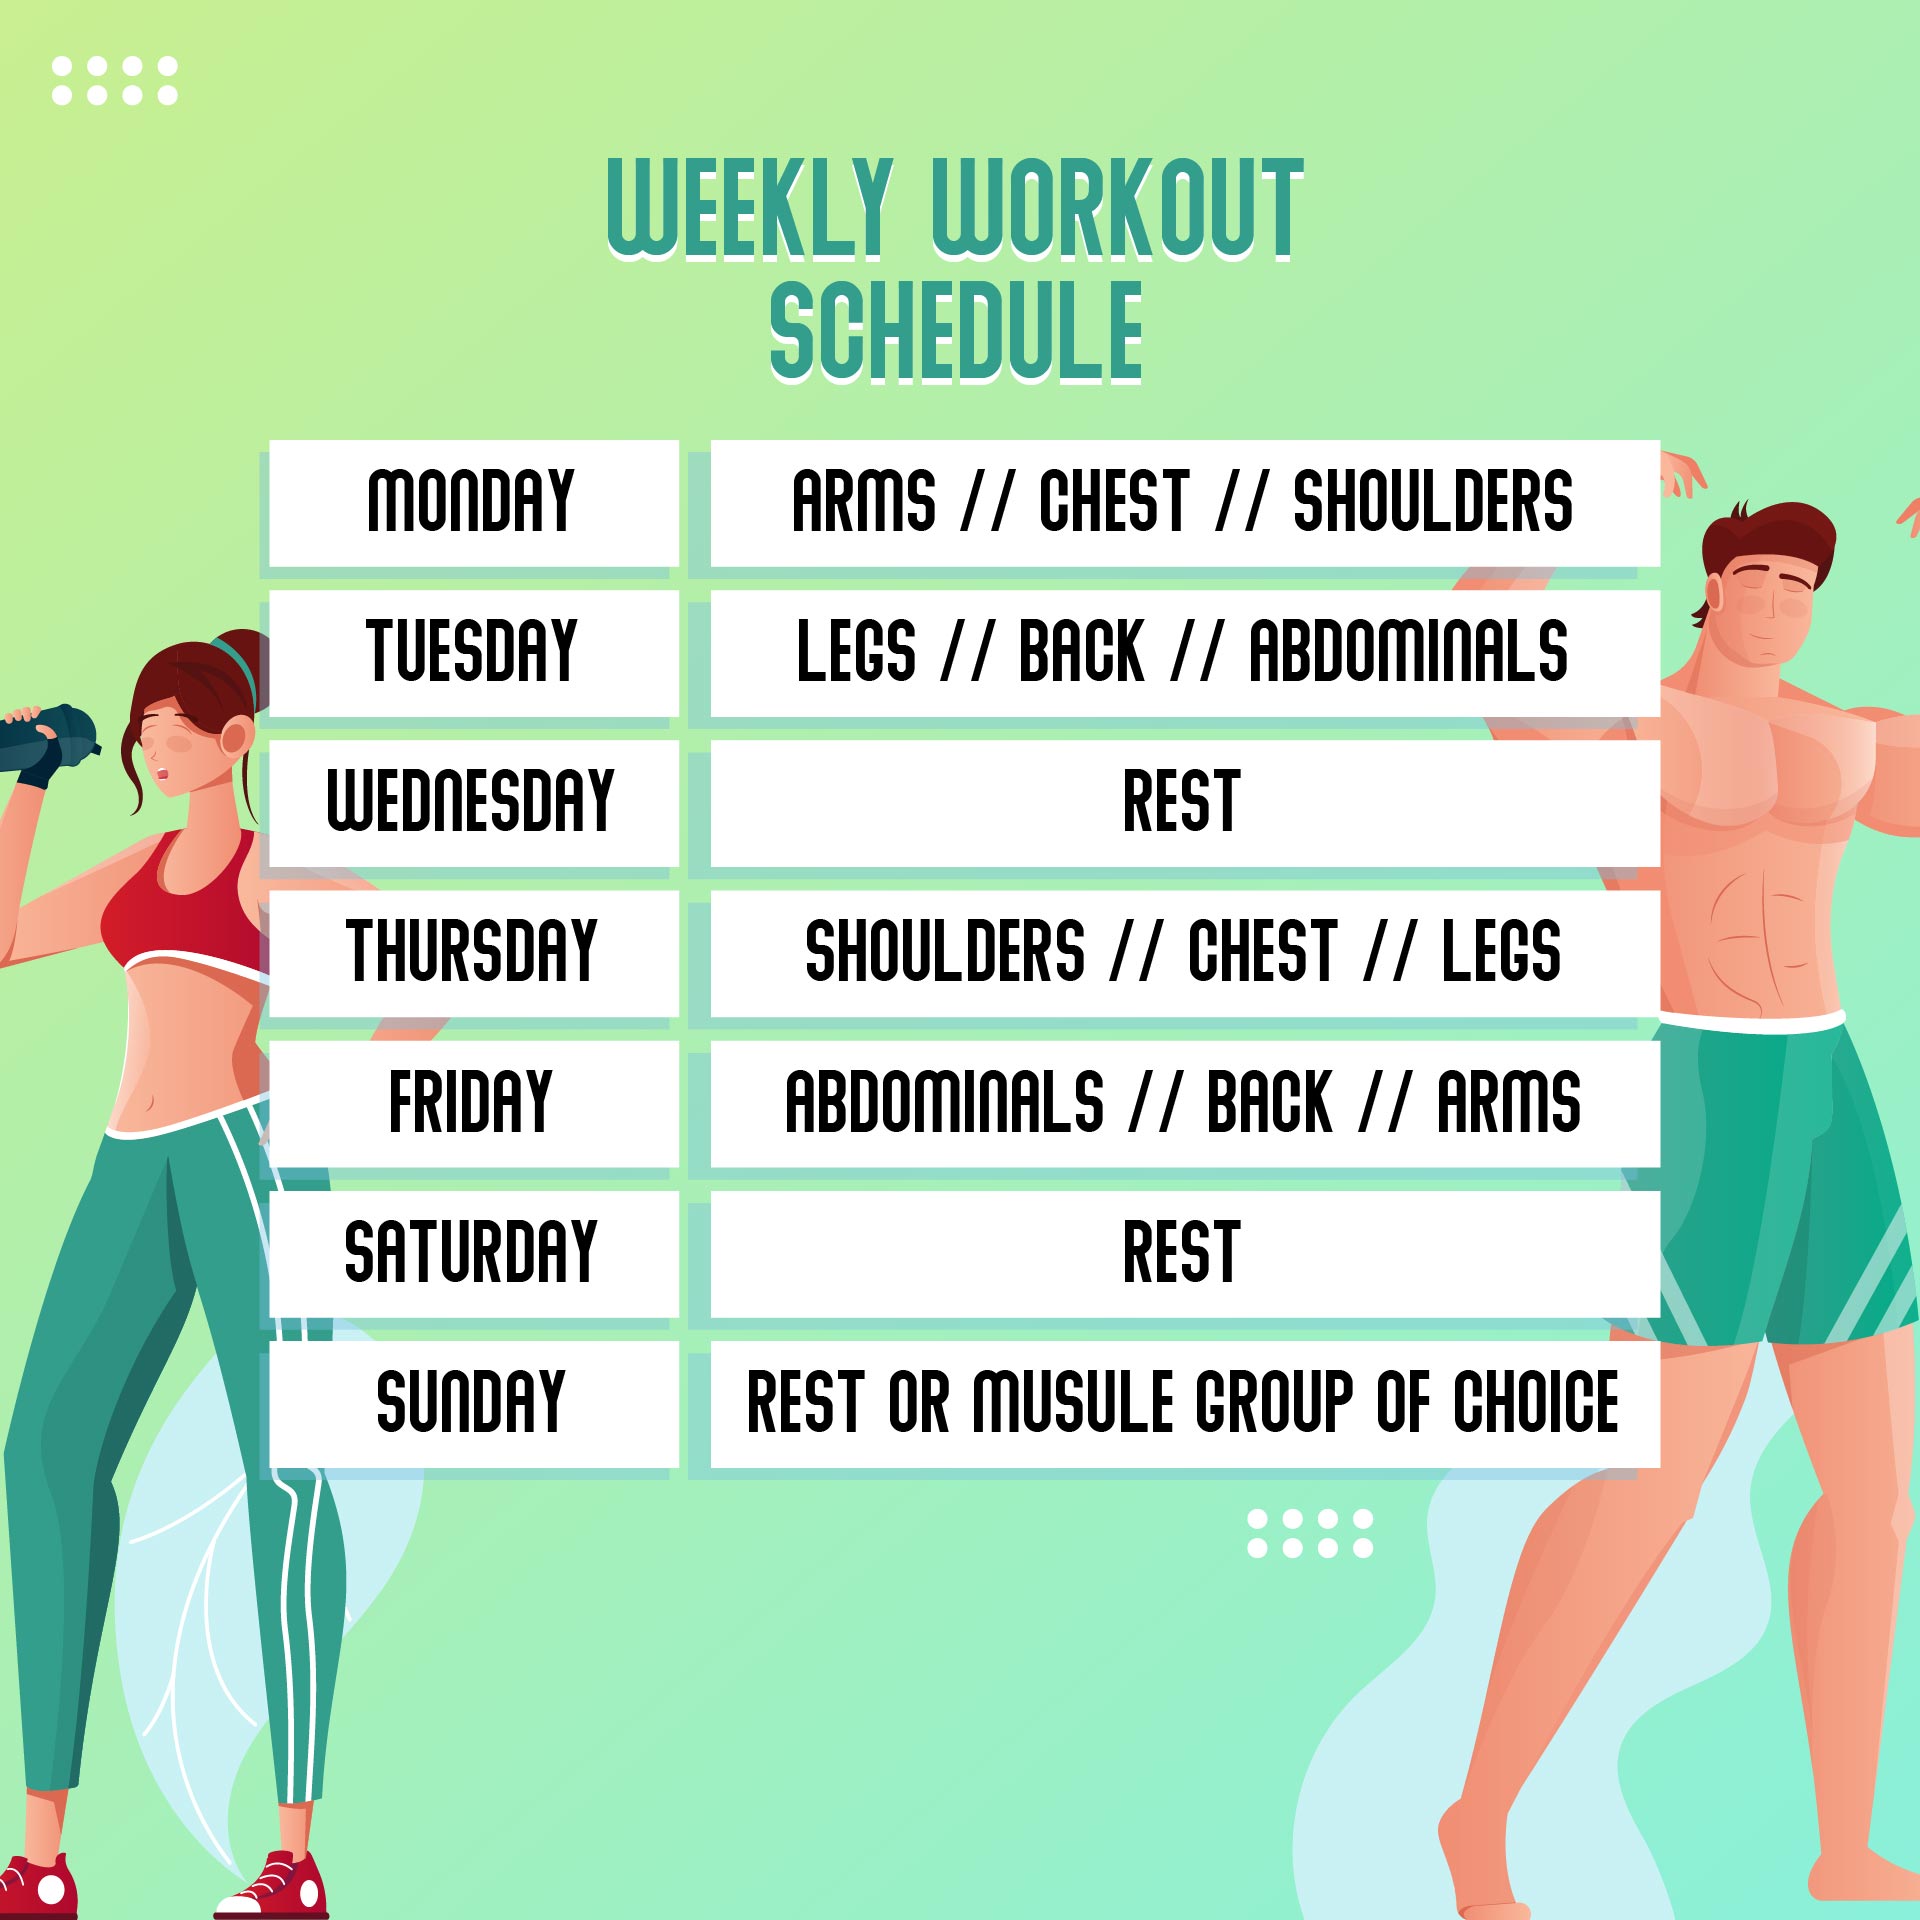 6 Best Images of Free Printable Weekly Workout Schedule - Printable ...